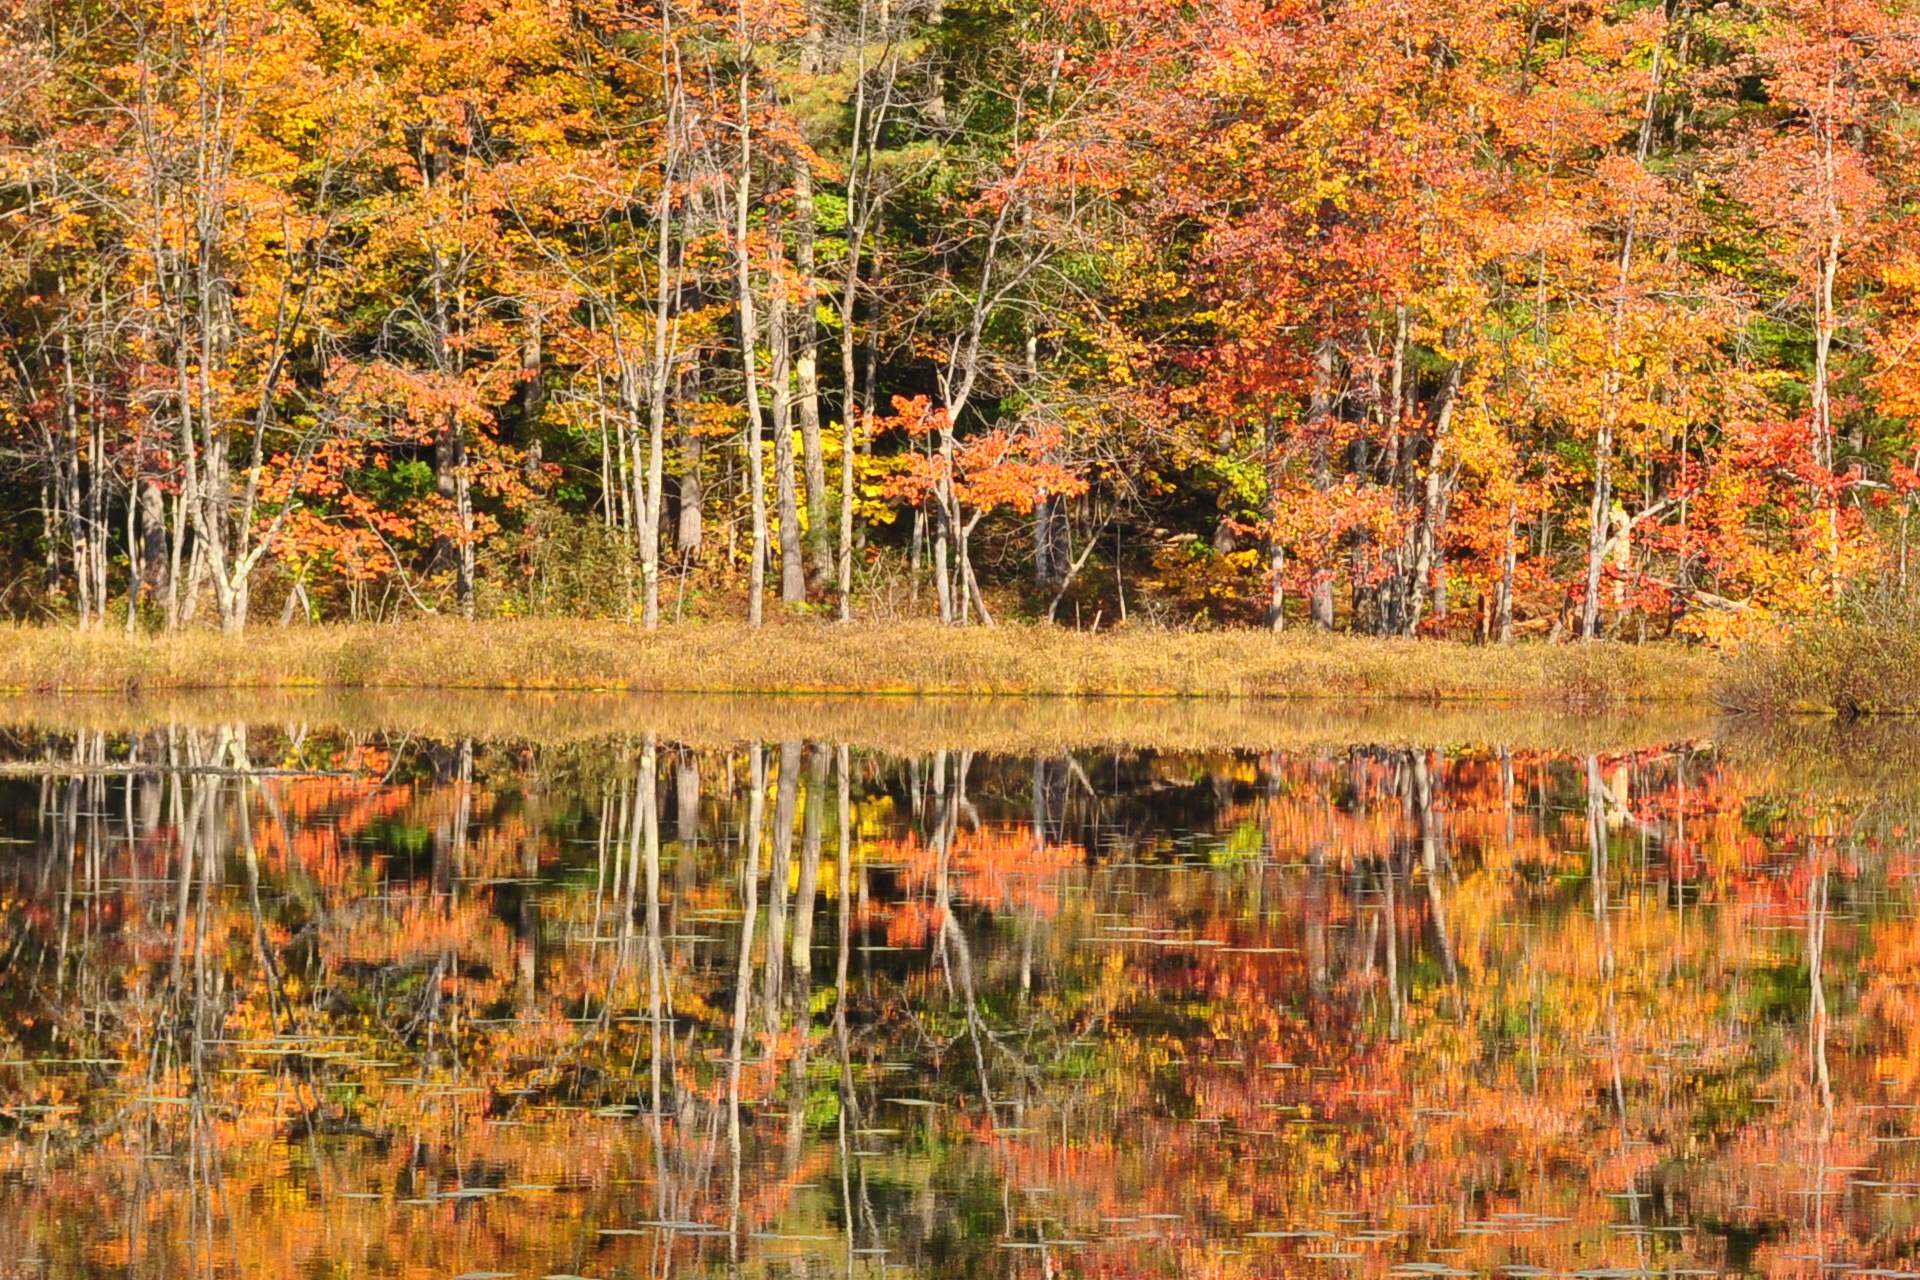 Reflecting On The Fall (user submitted)